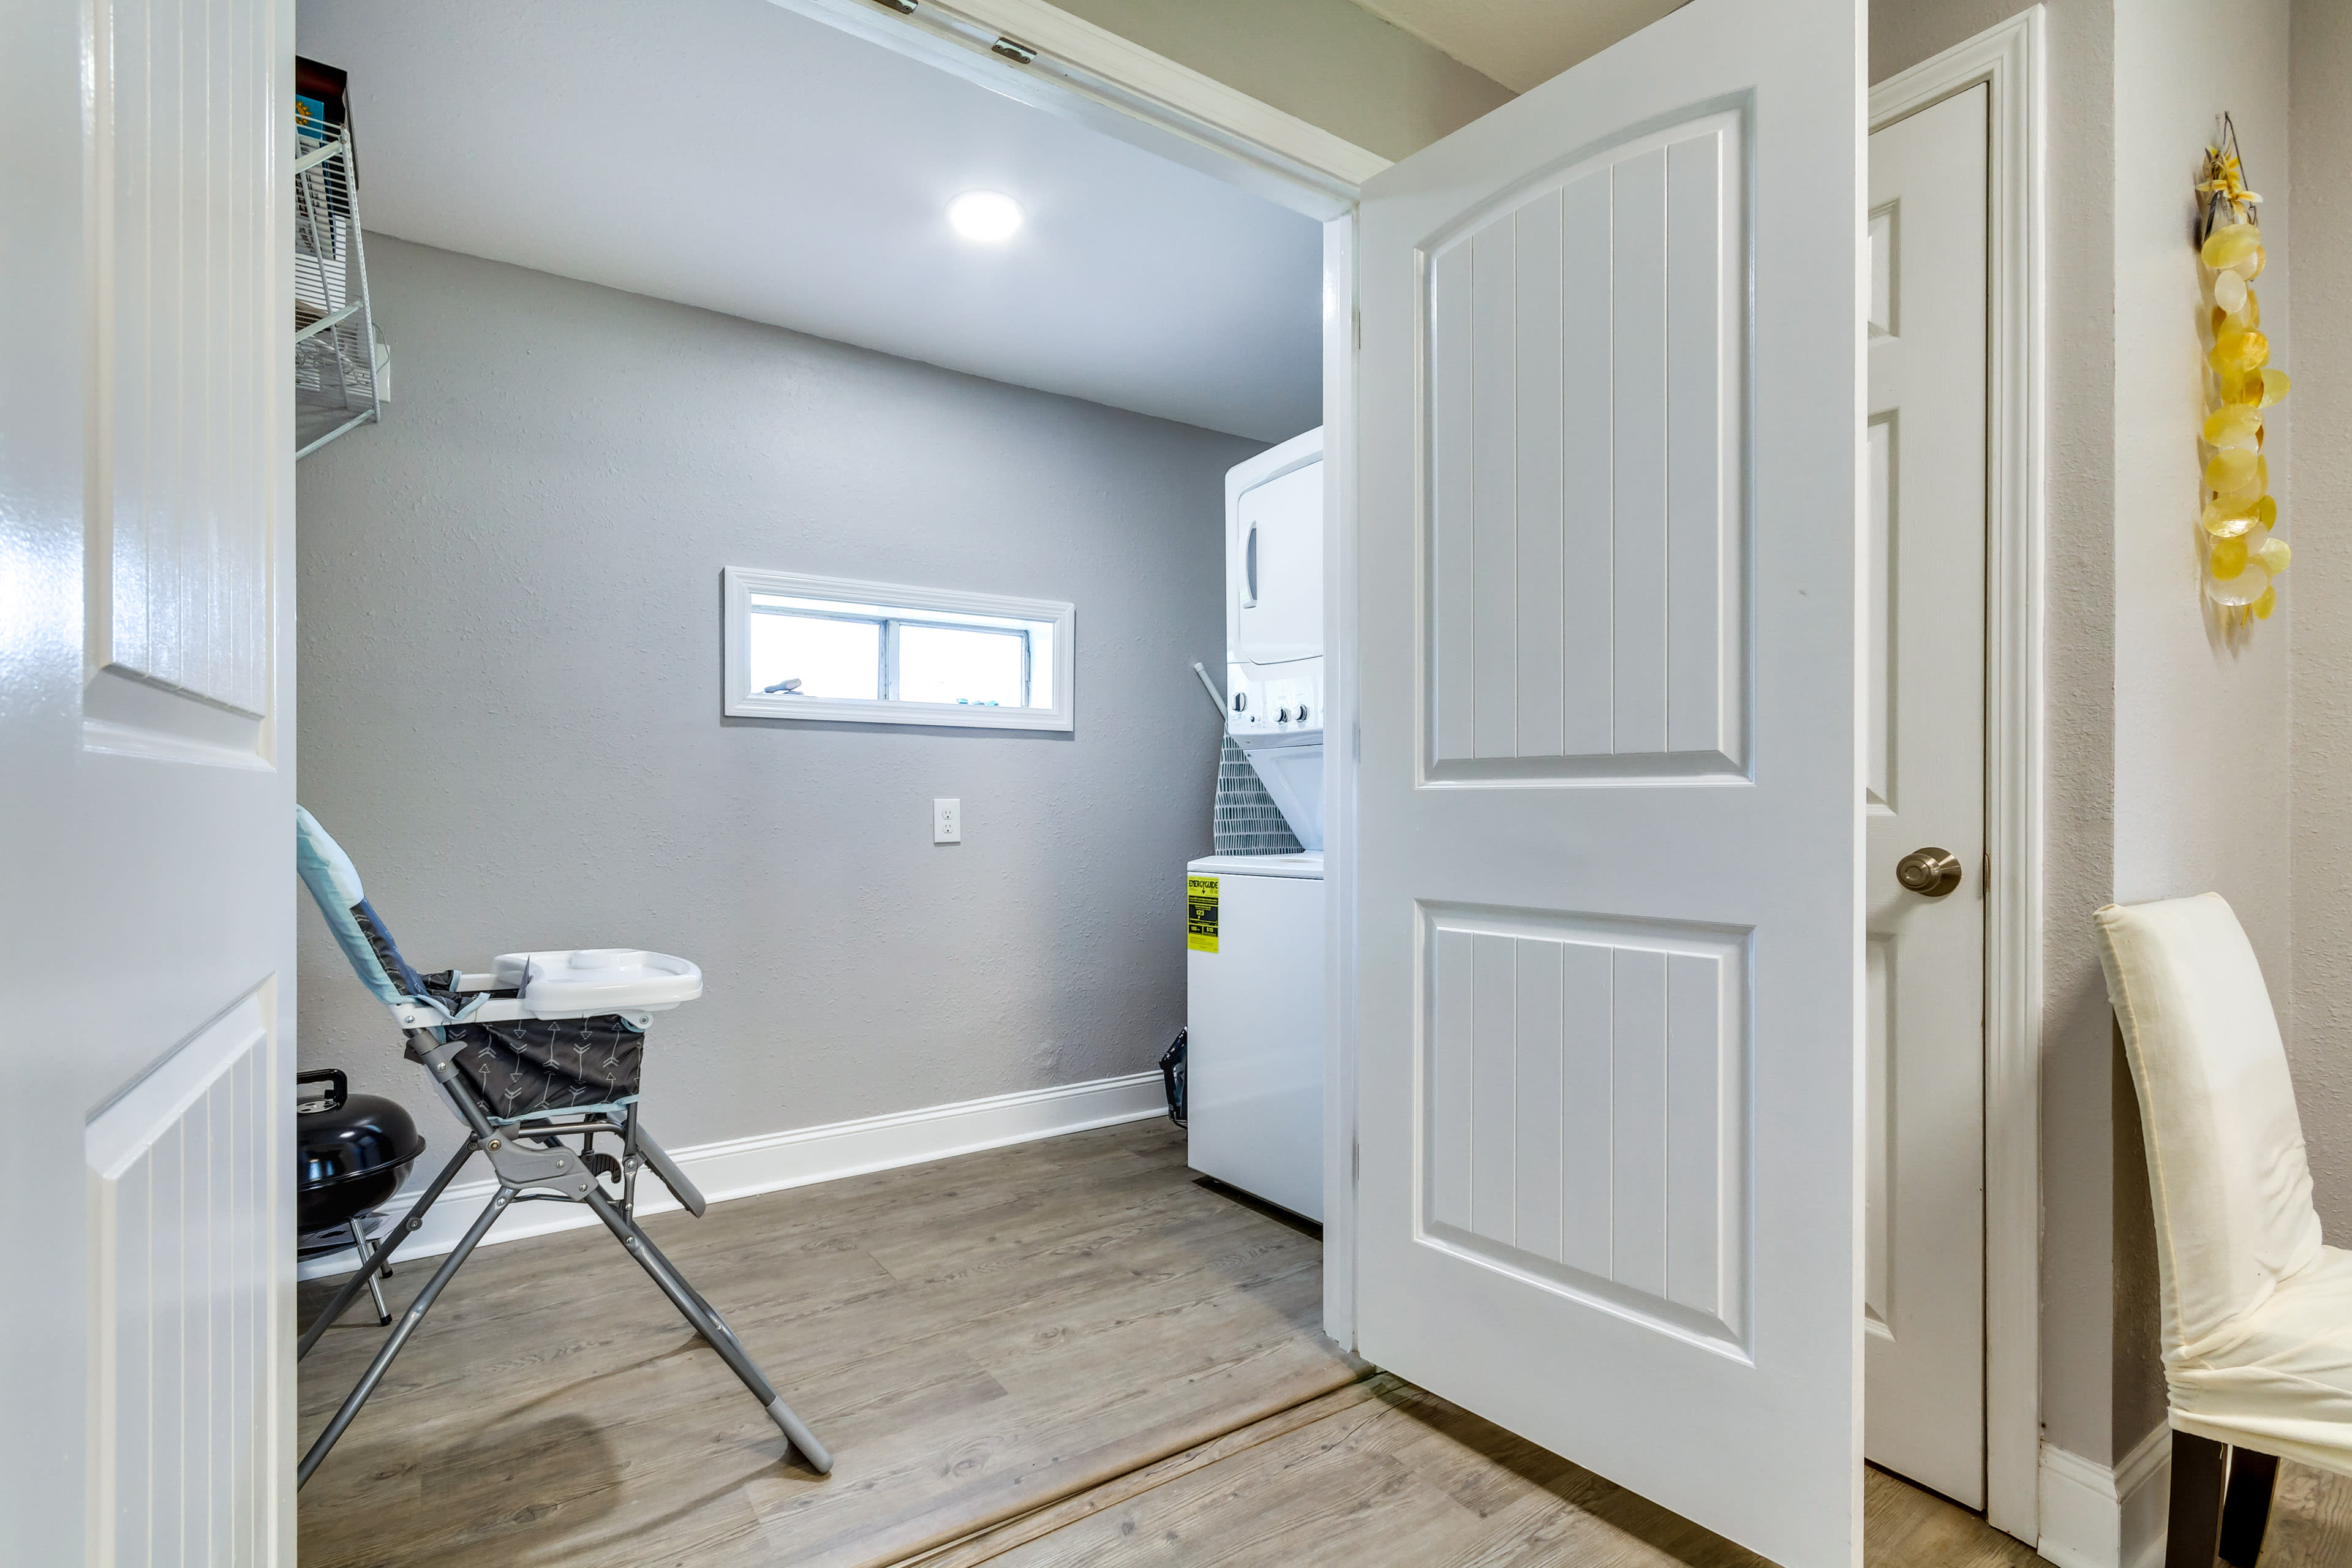 Laundry Room | High Chair | Tabletop Charcoal Grill